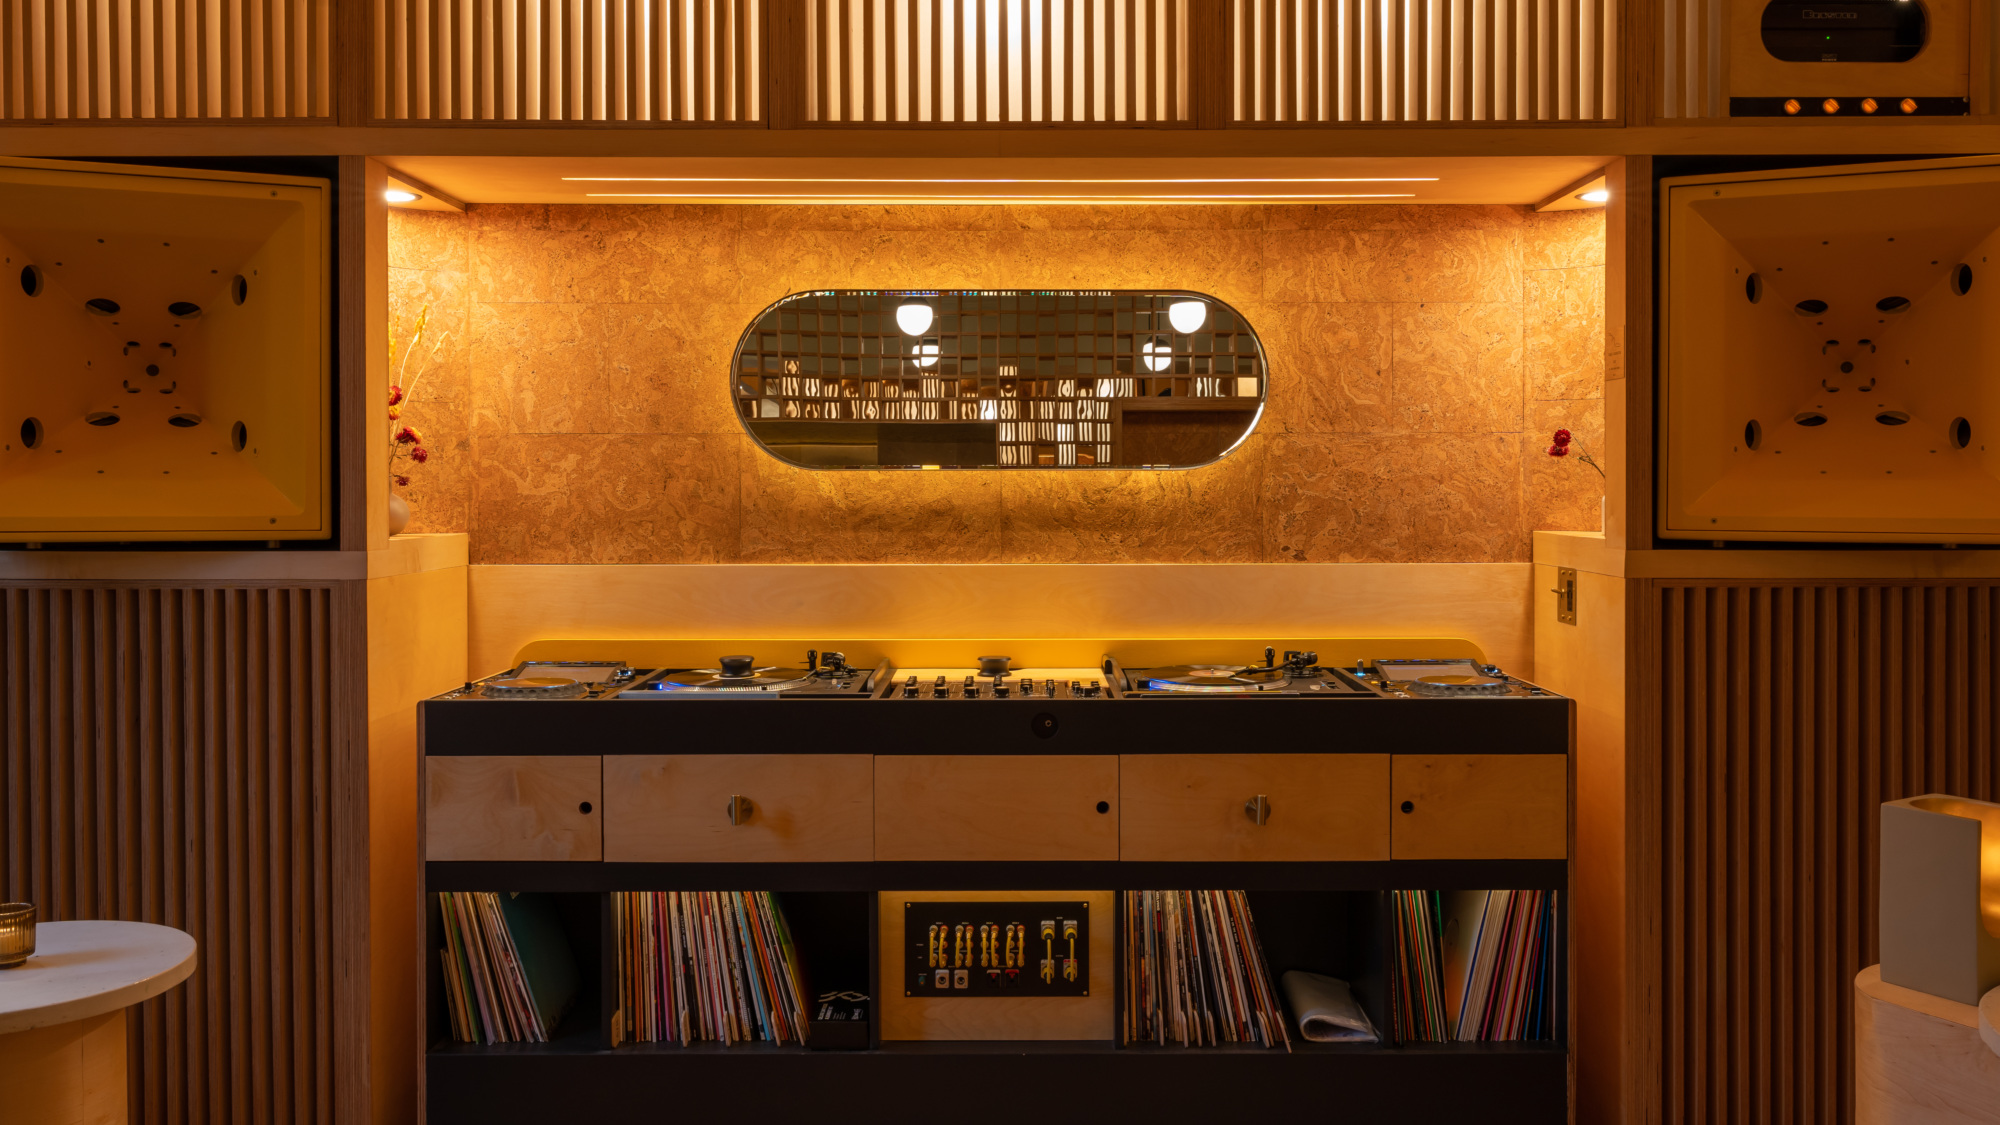 Sound is the biggest feature at this listening room/bar in Greenpoint, Brooklyn.